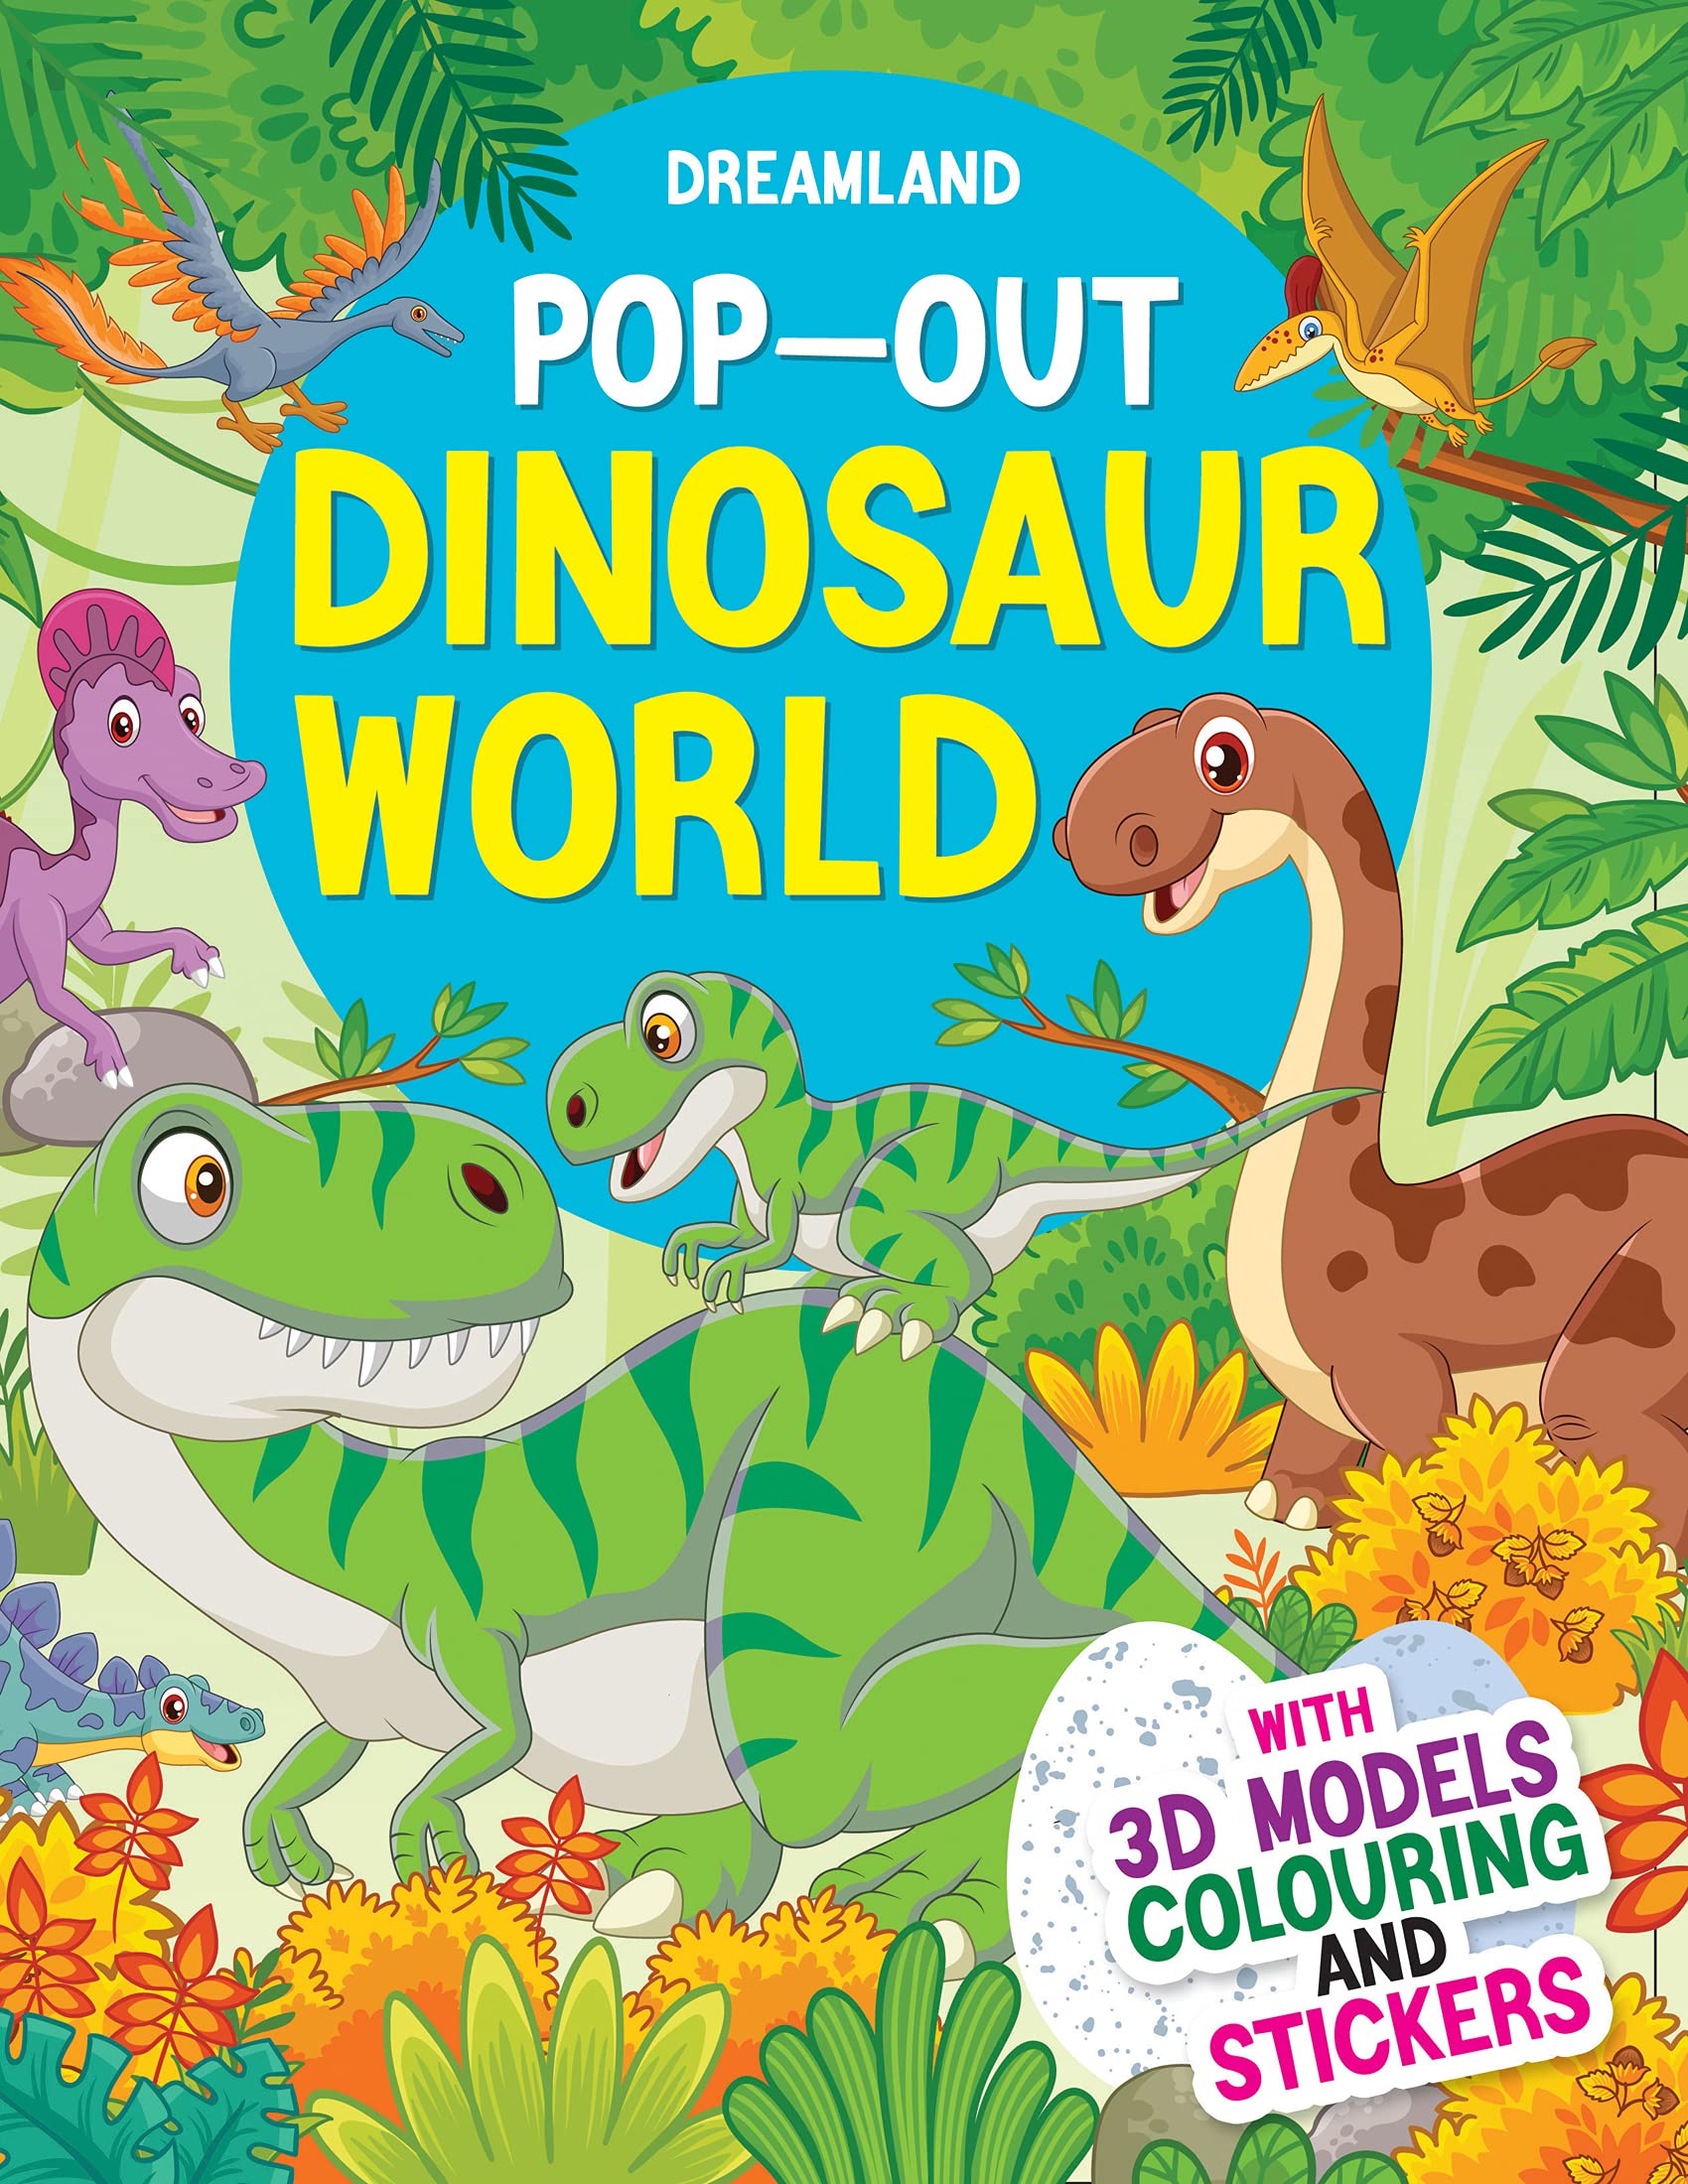 Dinosaurs World - Pop-Out Book with 3D Models Colouring and Stickers